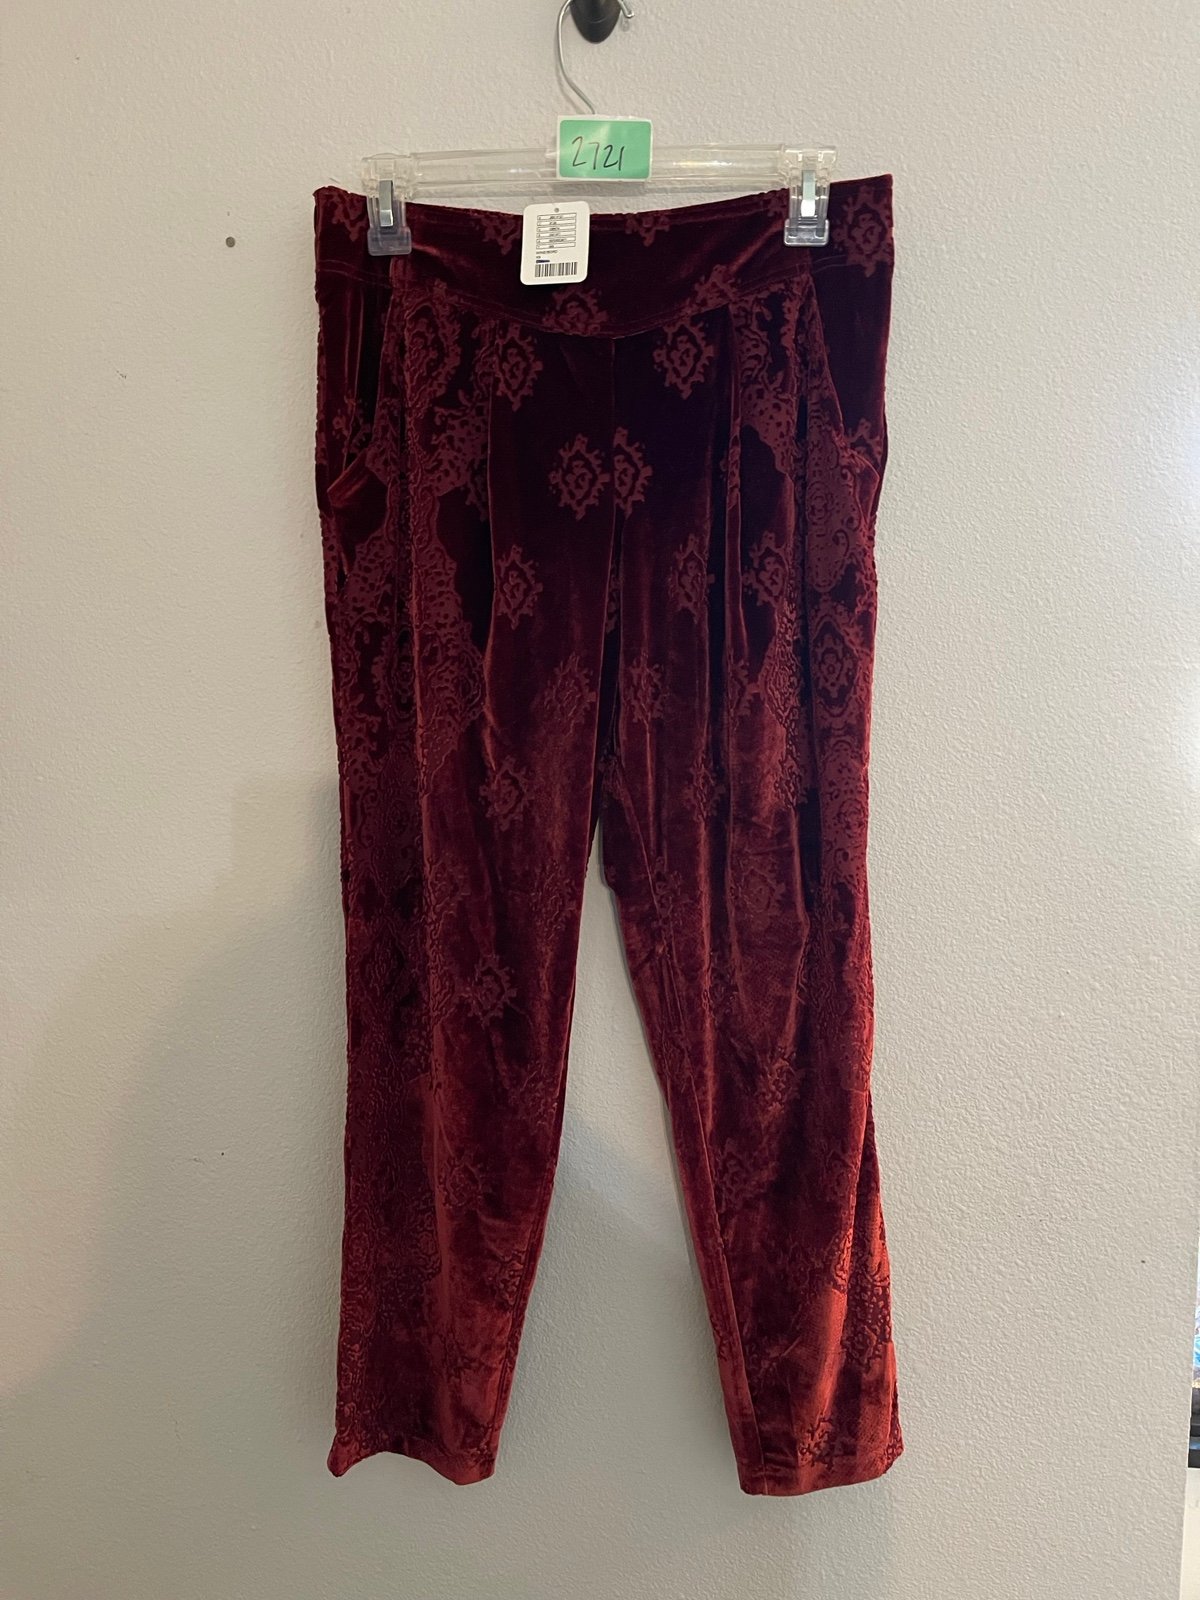 large discount Free People crushed velvet pants NWT size XS PCtjfDaiY Outlet Store